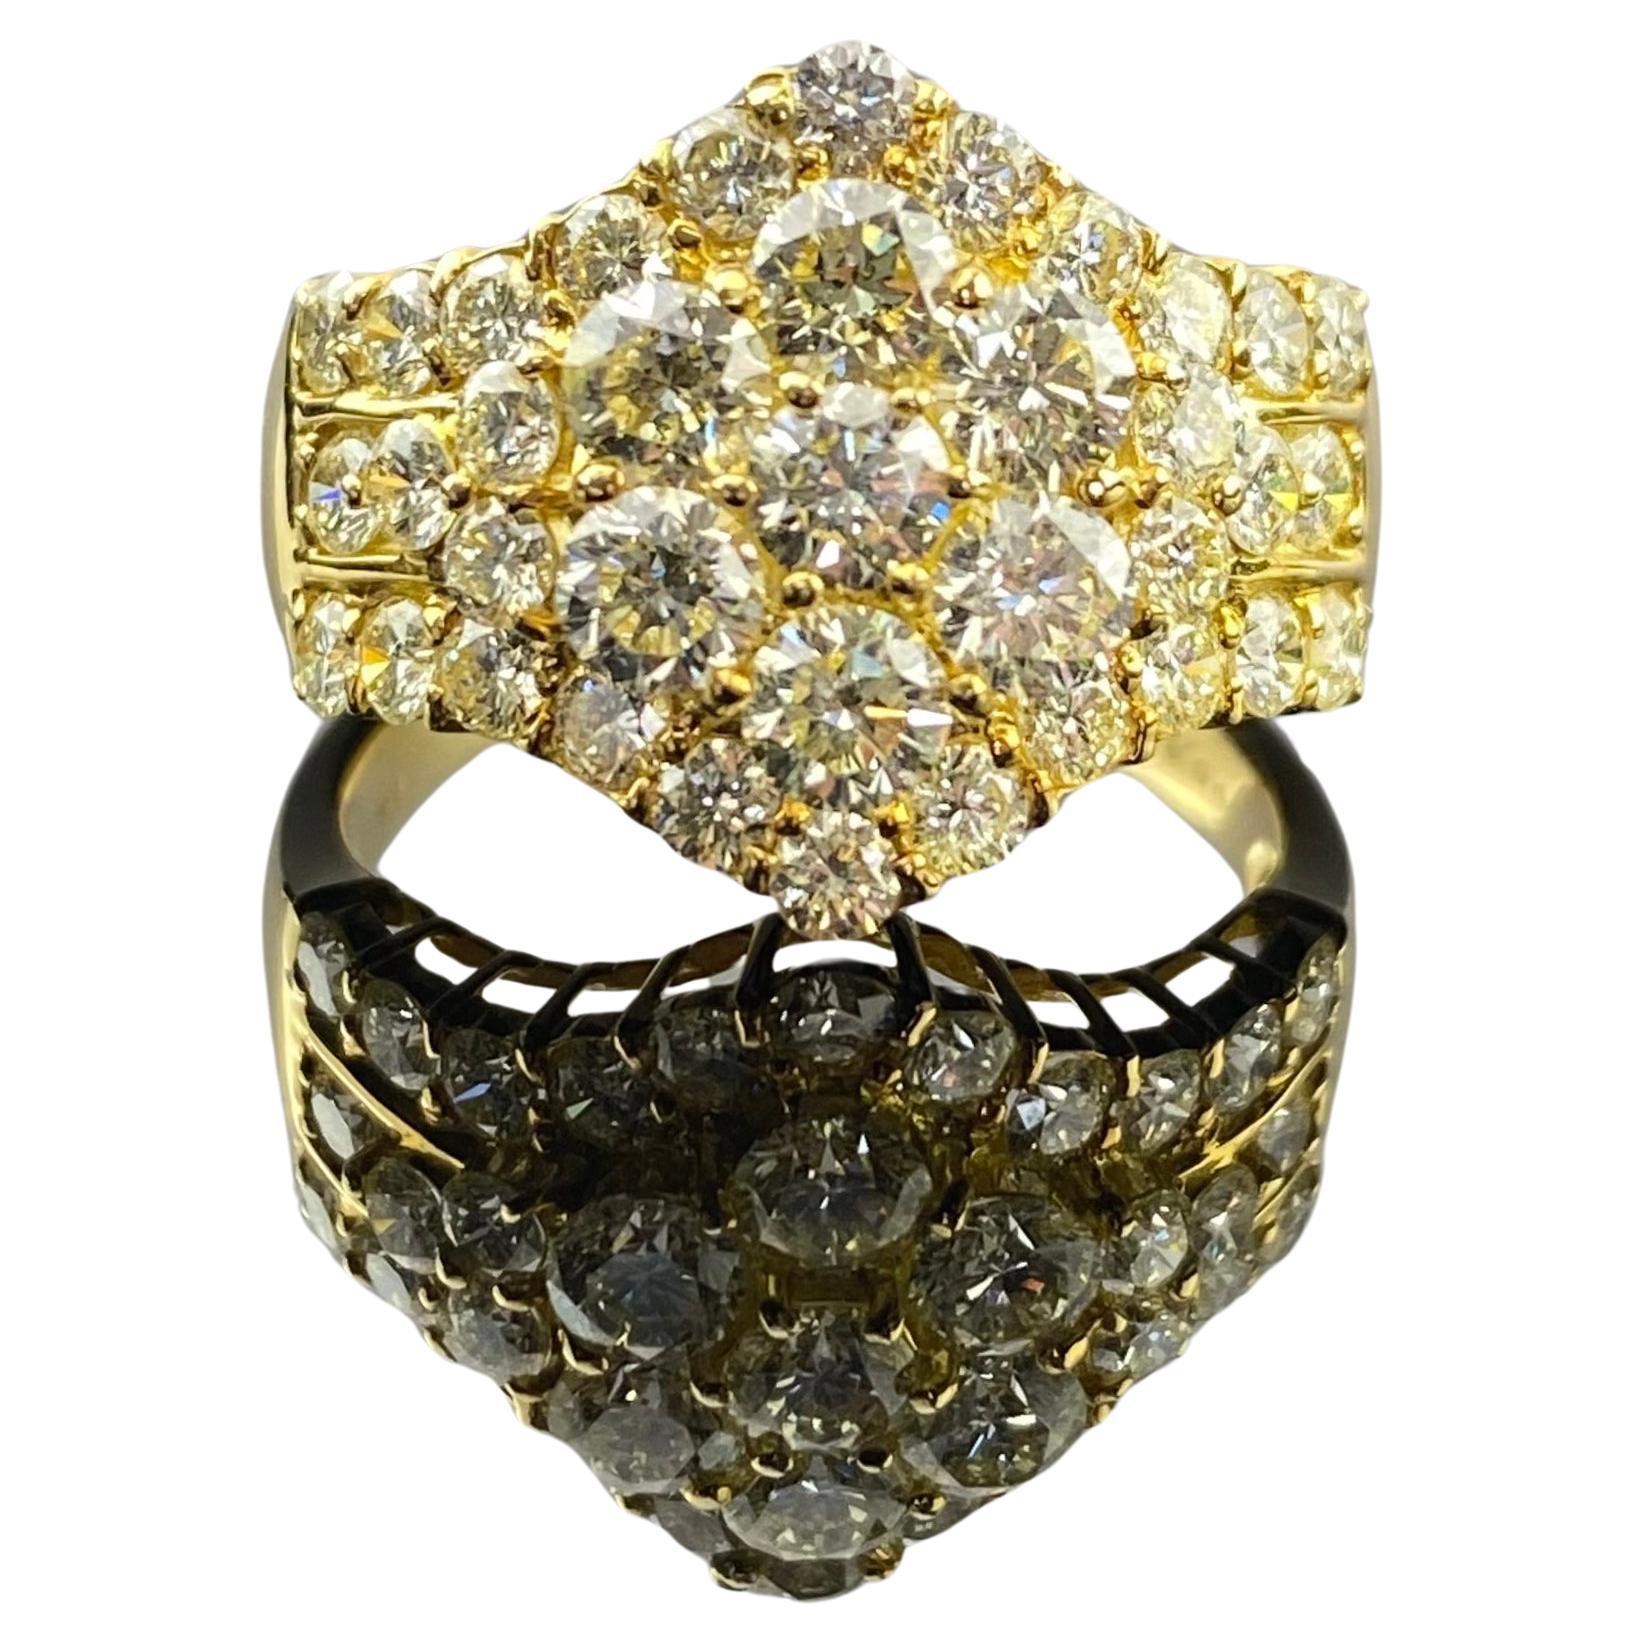 2 Carat Diamond and Yellow Gold Cluster Ring